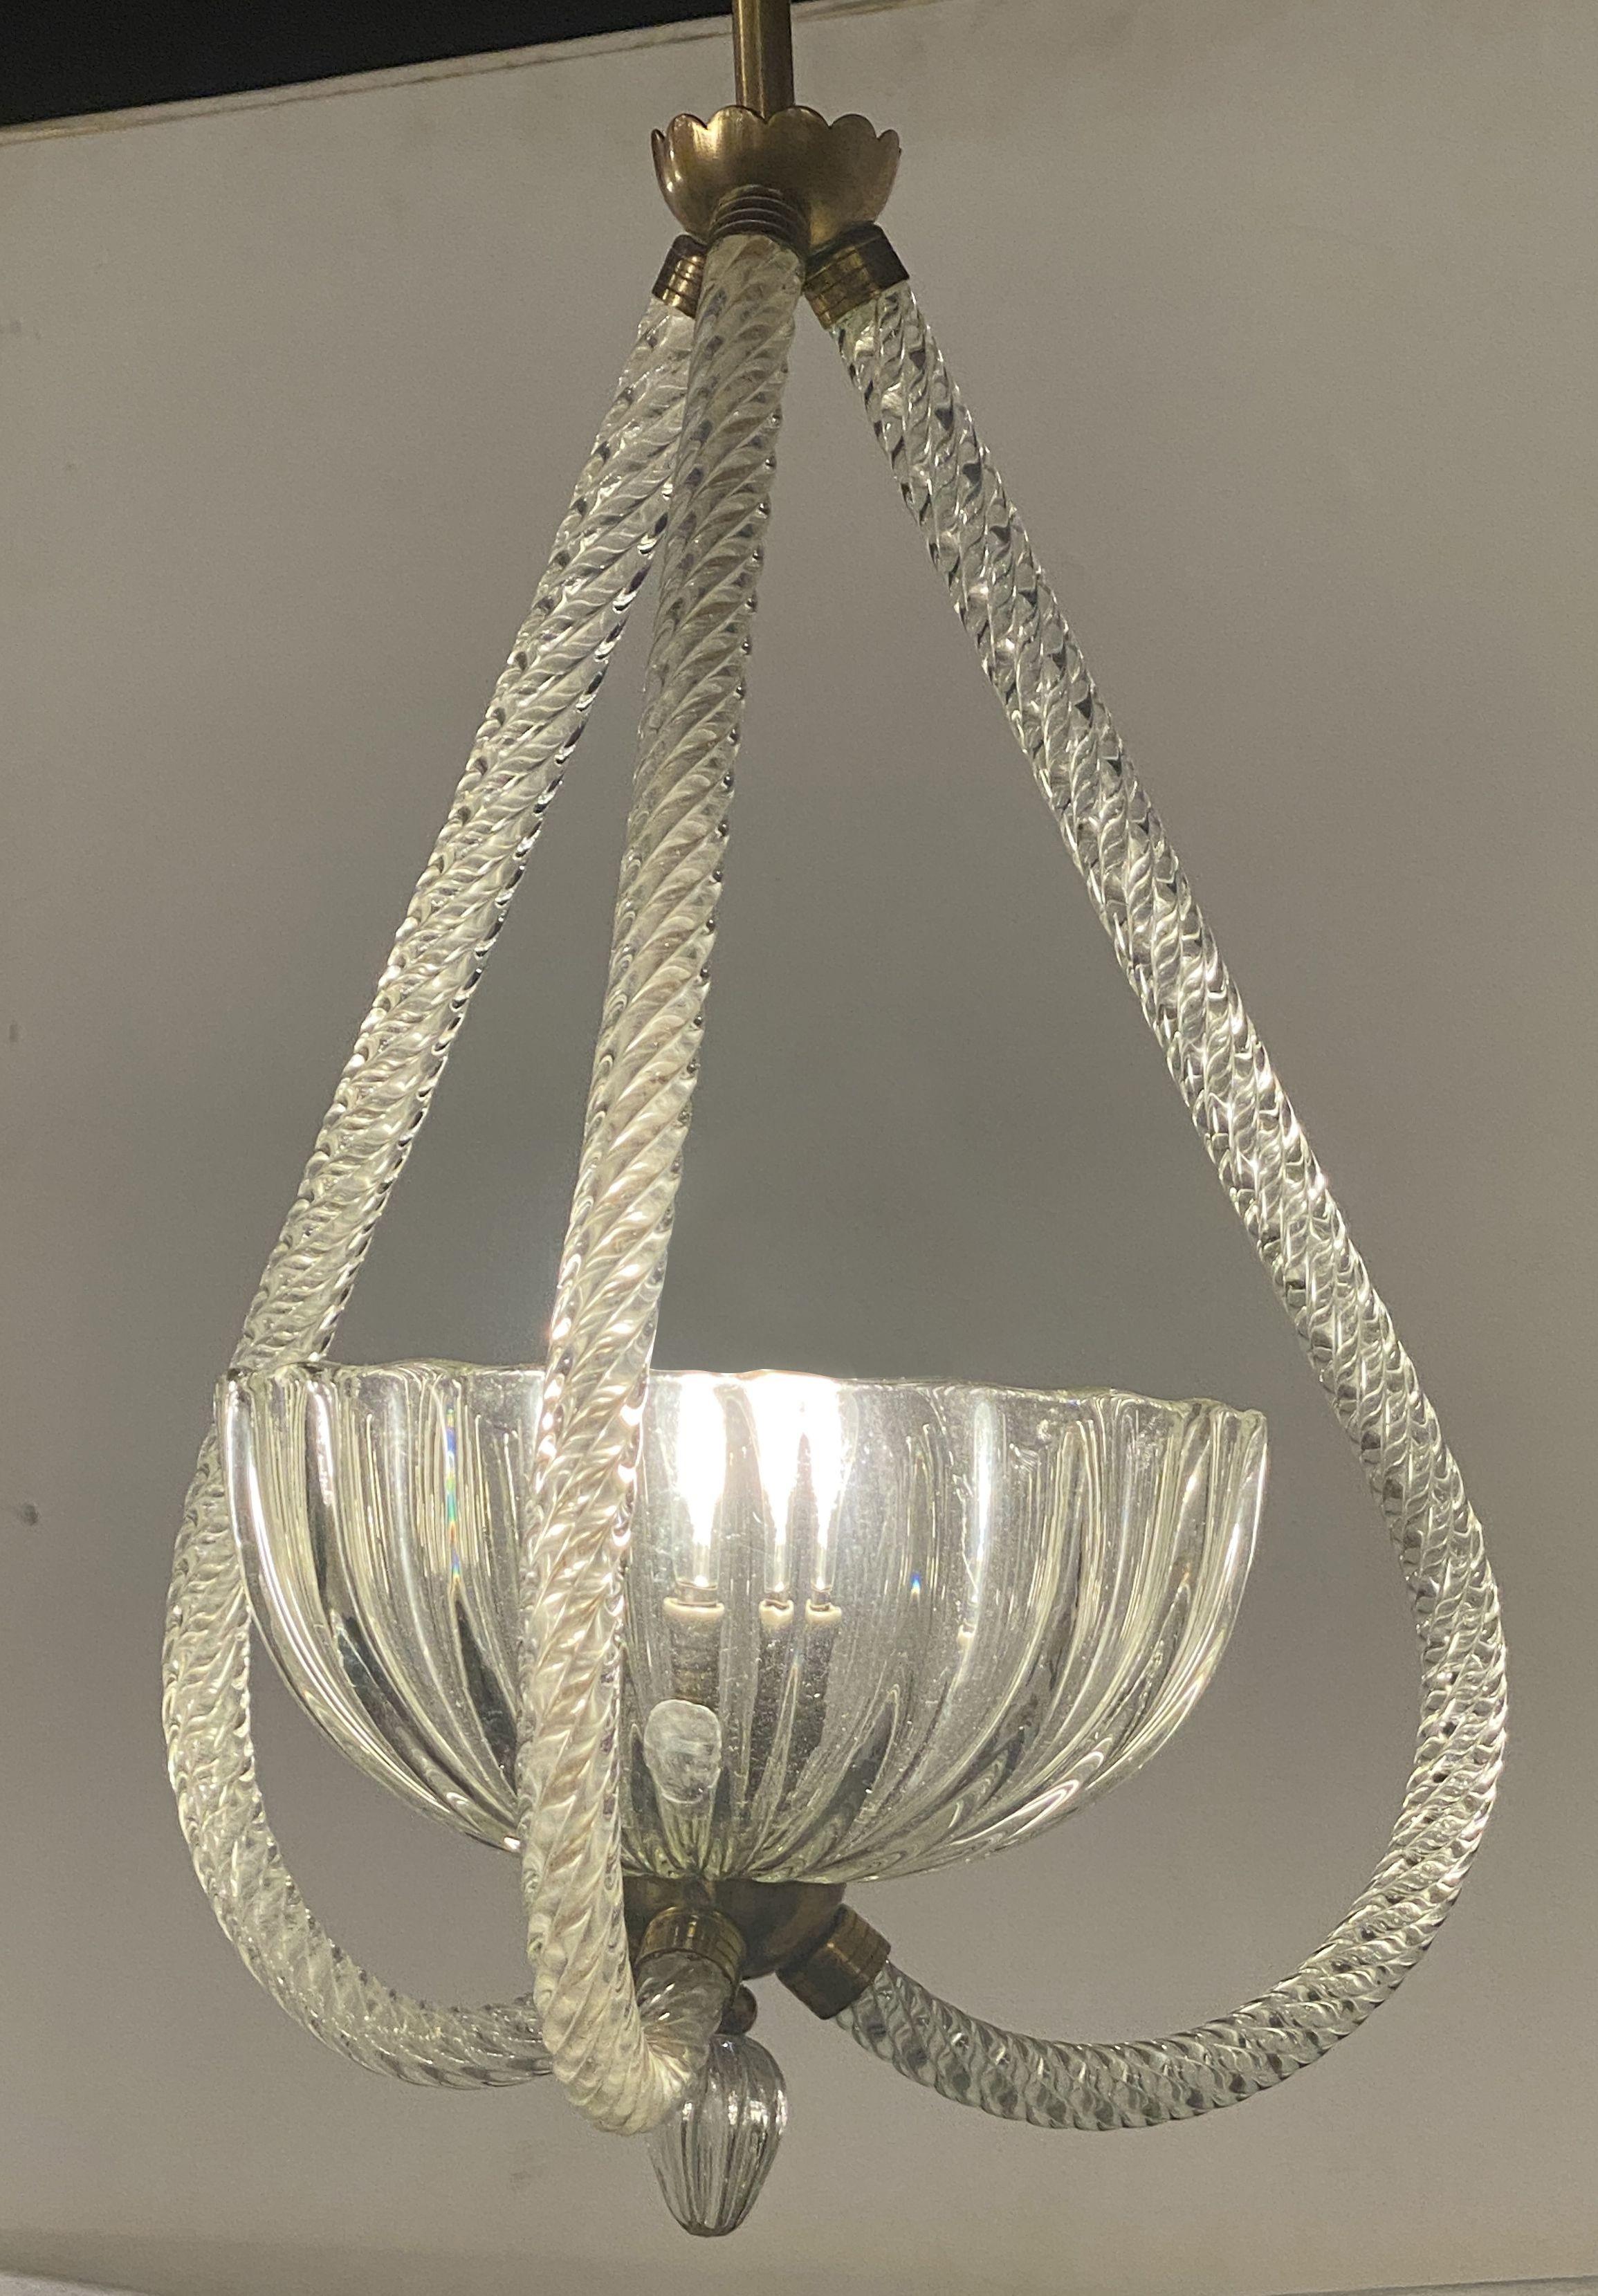 Hand blown glass, central cup with uplight surrounded by 3 arched rope twisted glass elements, joined by a brass section terminating in tear drop glass.